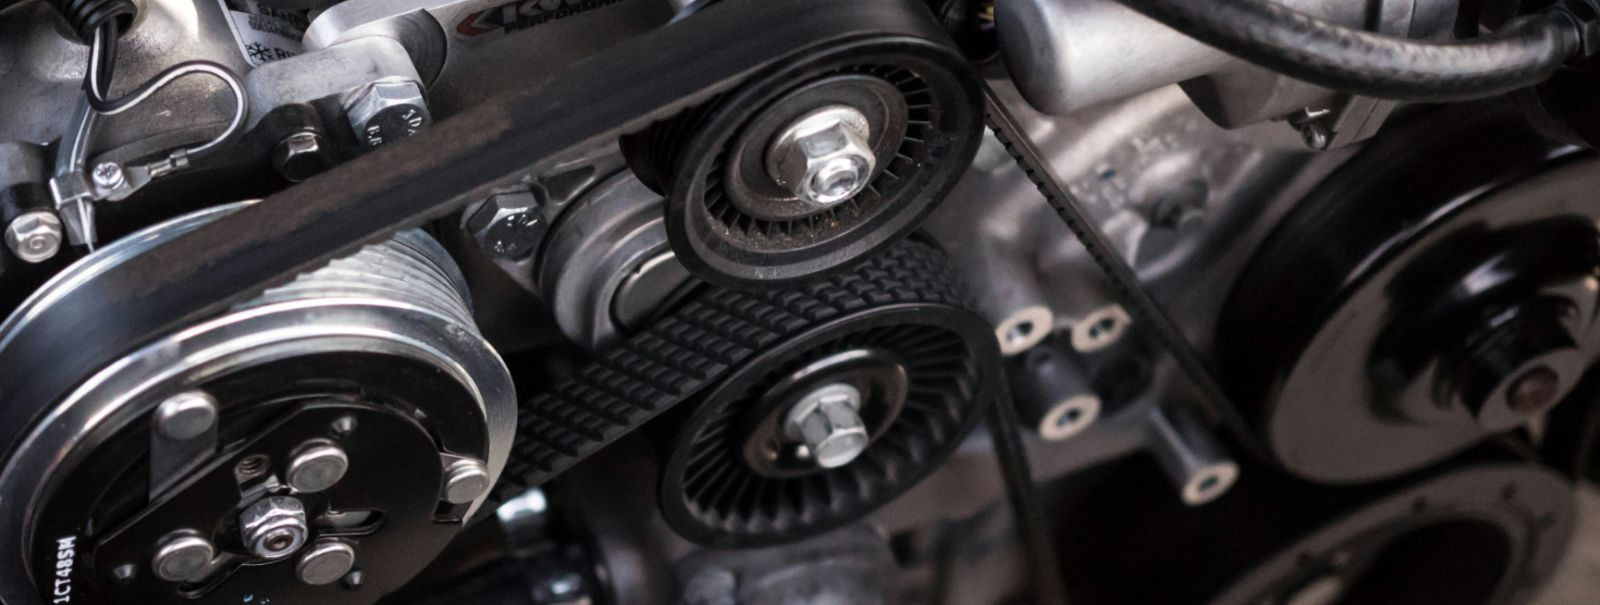 Regular maintenance is crucial for the longevity and safety of your vehicle. Ignoring signs of trouble can lead to more significant issues down the road. Here a